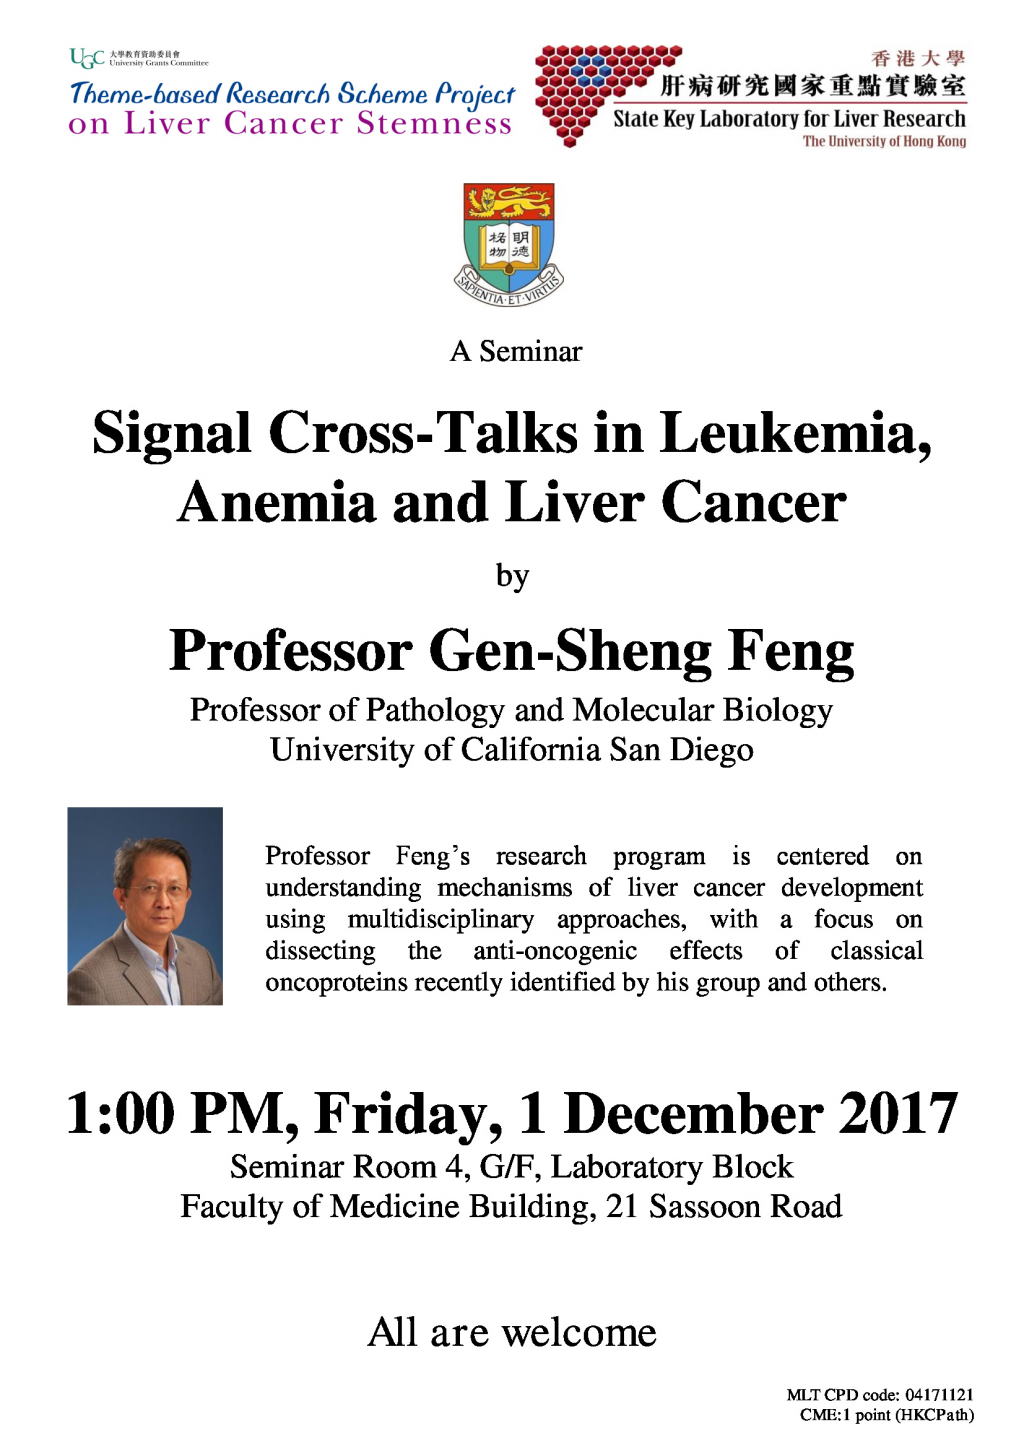 Signal Cross-Talks in Leukemia, Anemia and Liver Cancer by Professor Gen-Sheng Feng on 1 Dec (1pm)